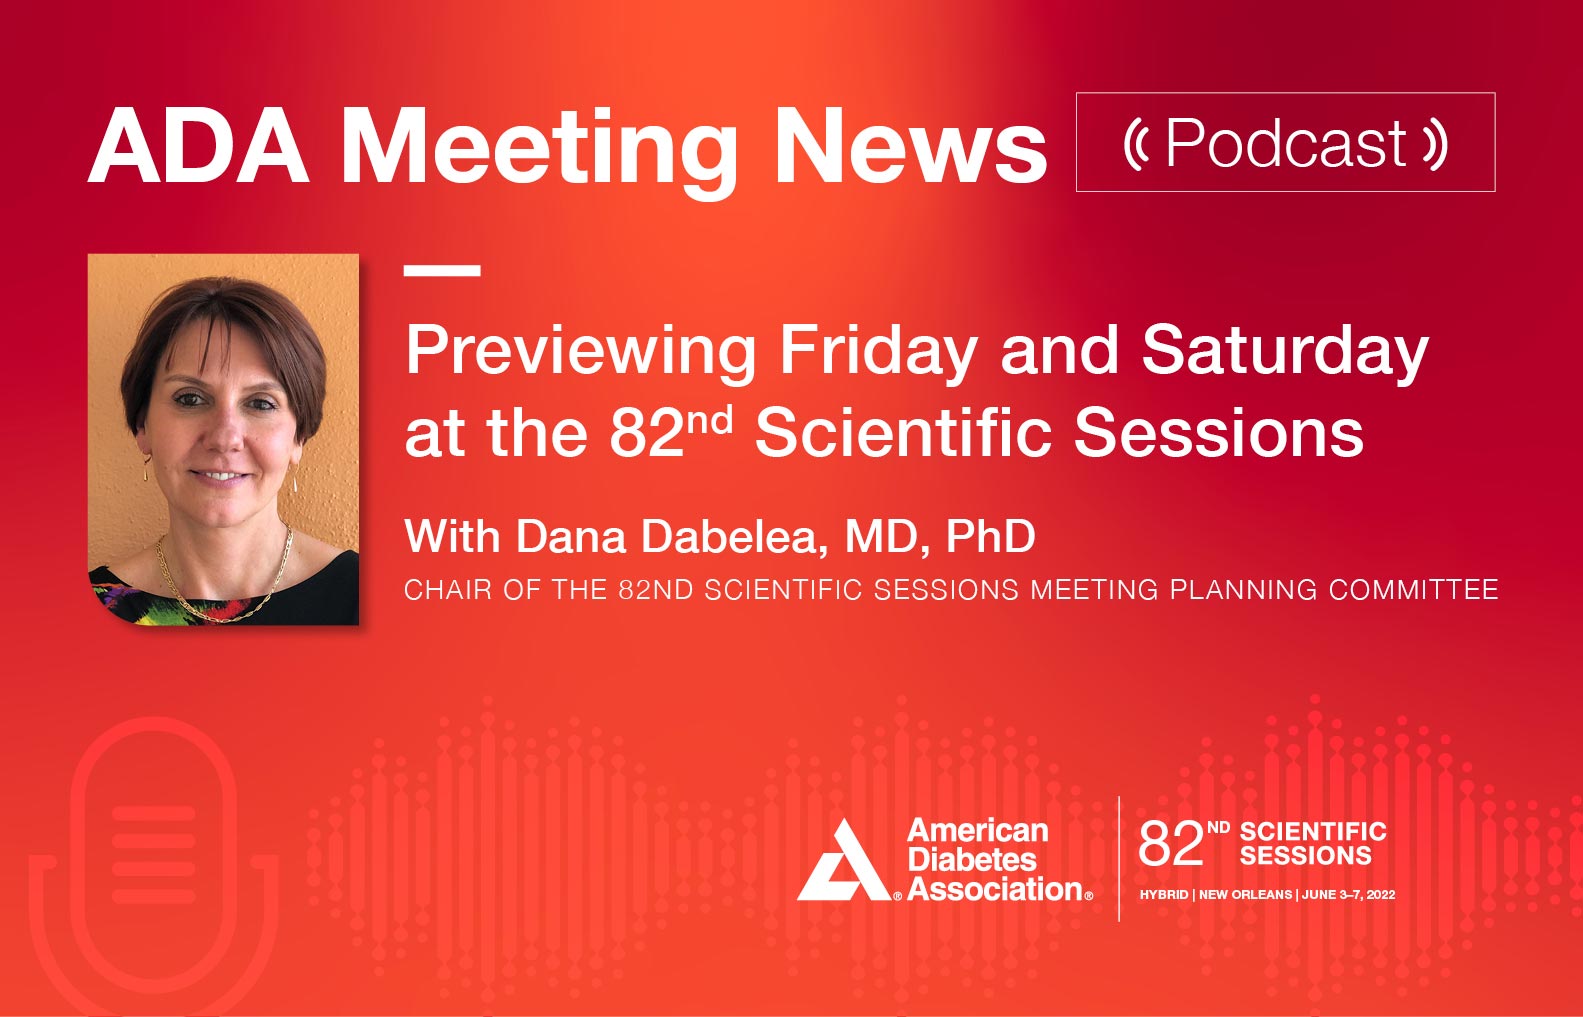 Episode 2: Previewing Friday and Looking Ahead to Saturday at the 82nd Scientific Sessions